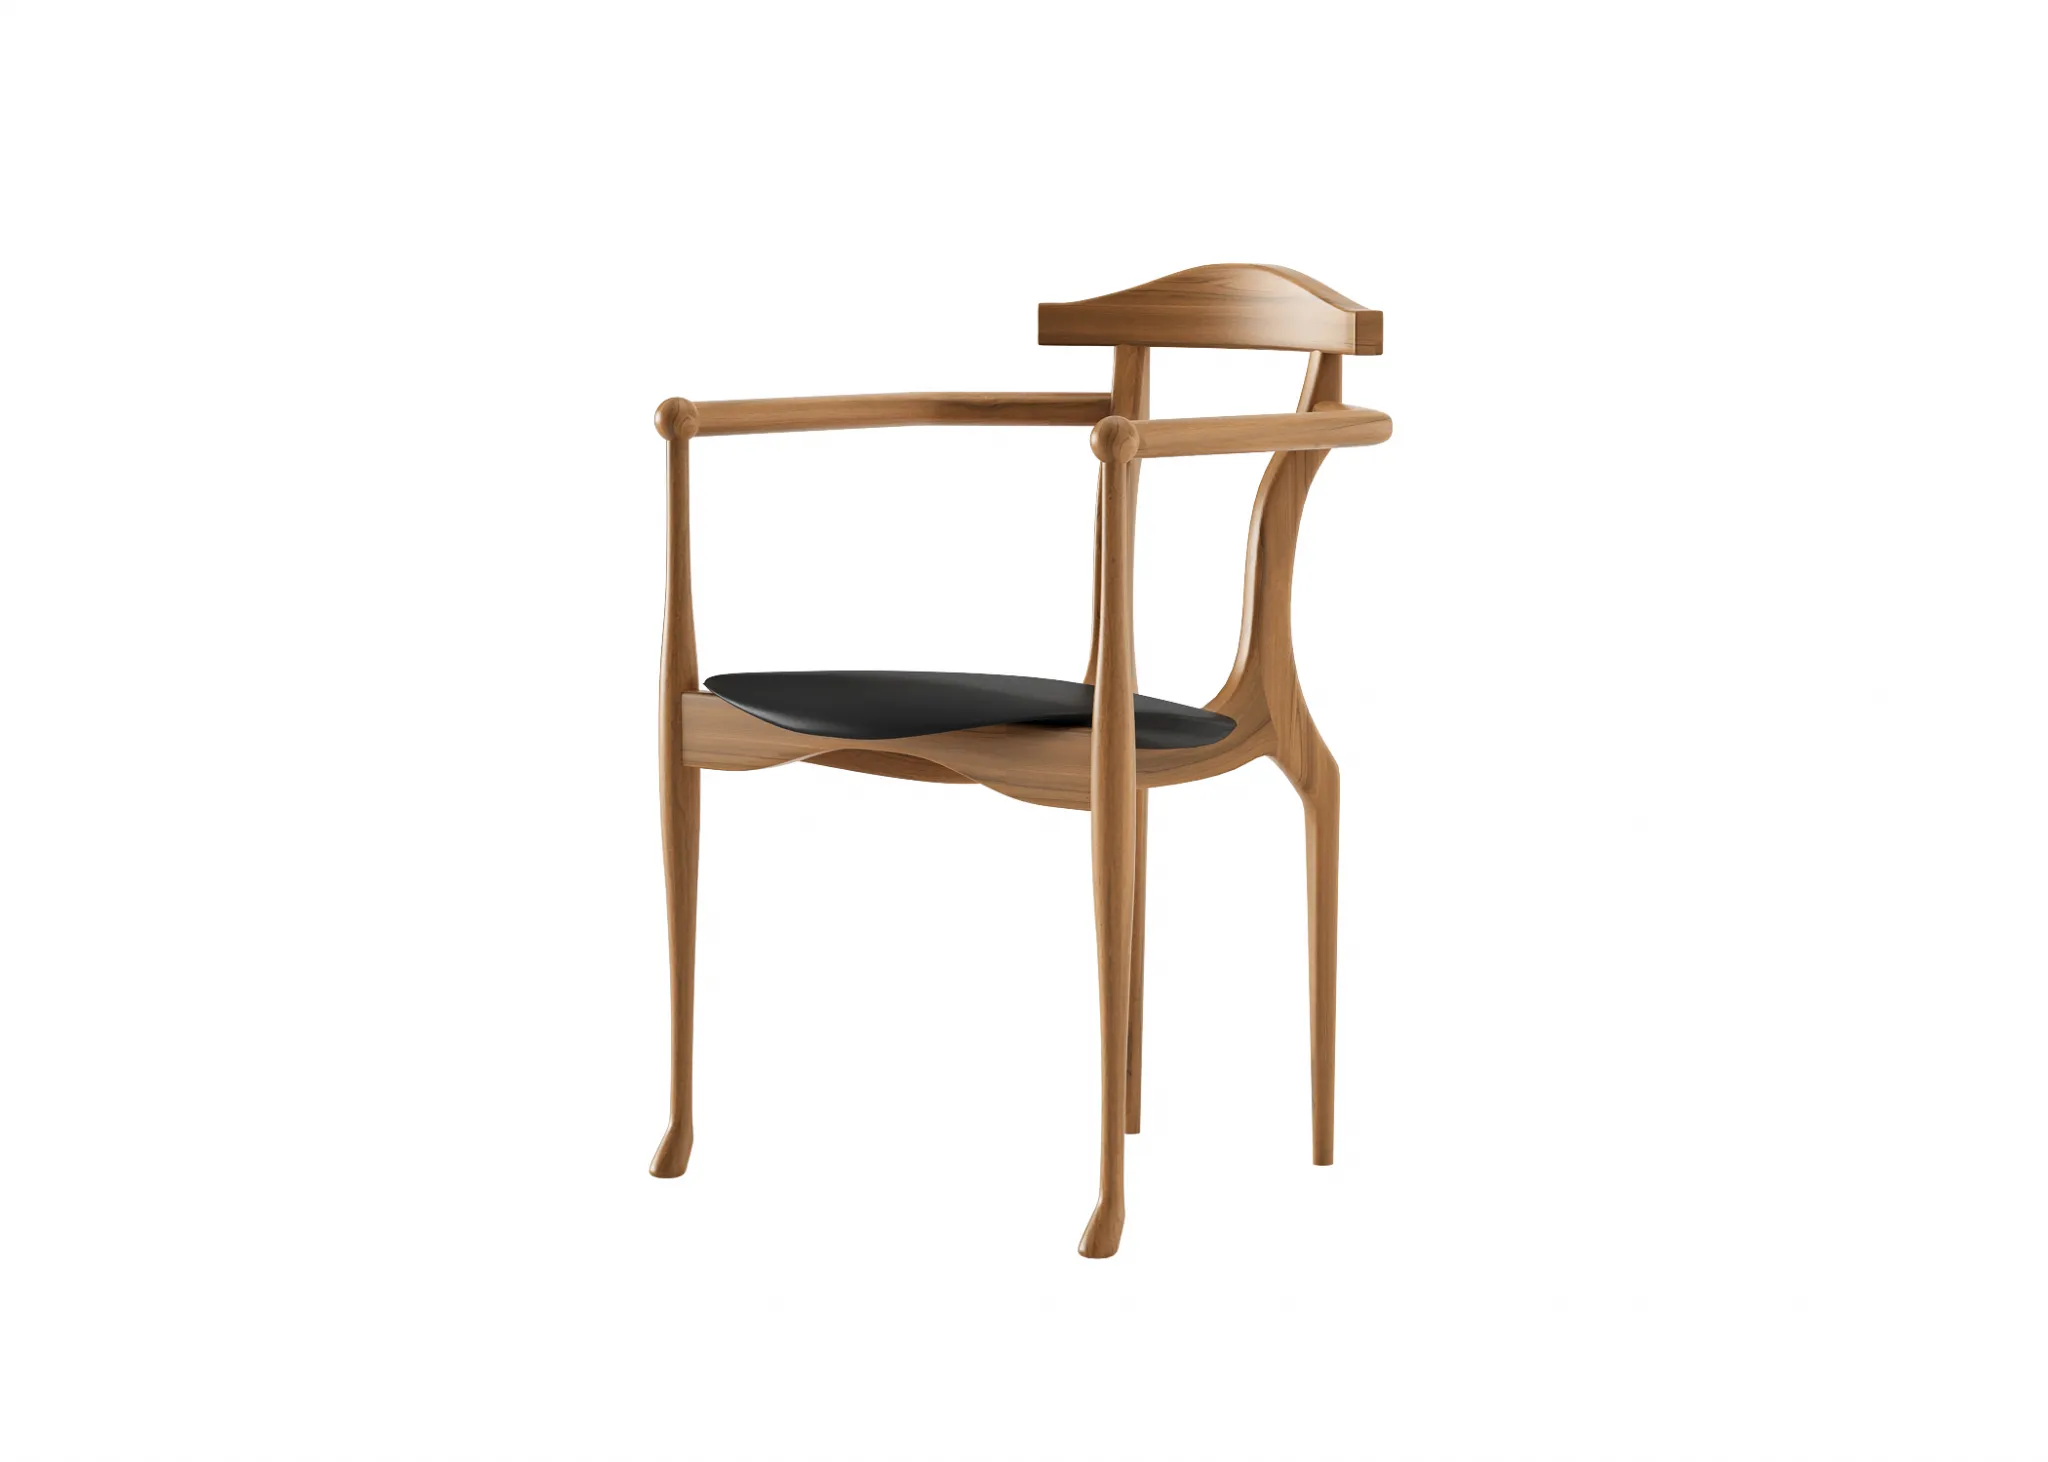 FURNITURE 3D MODELS – CHAIRS – 0321